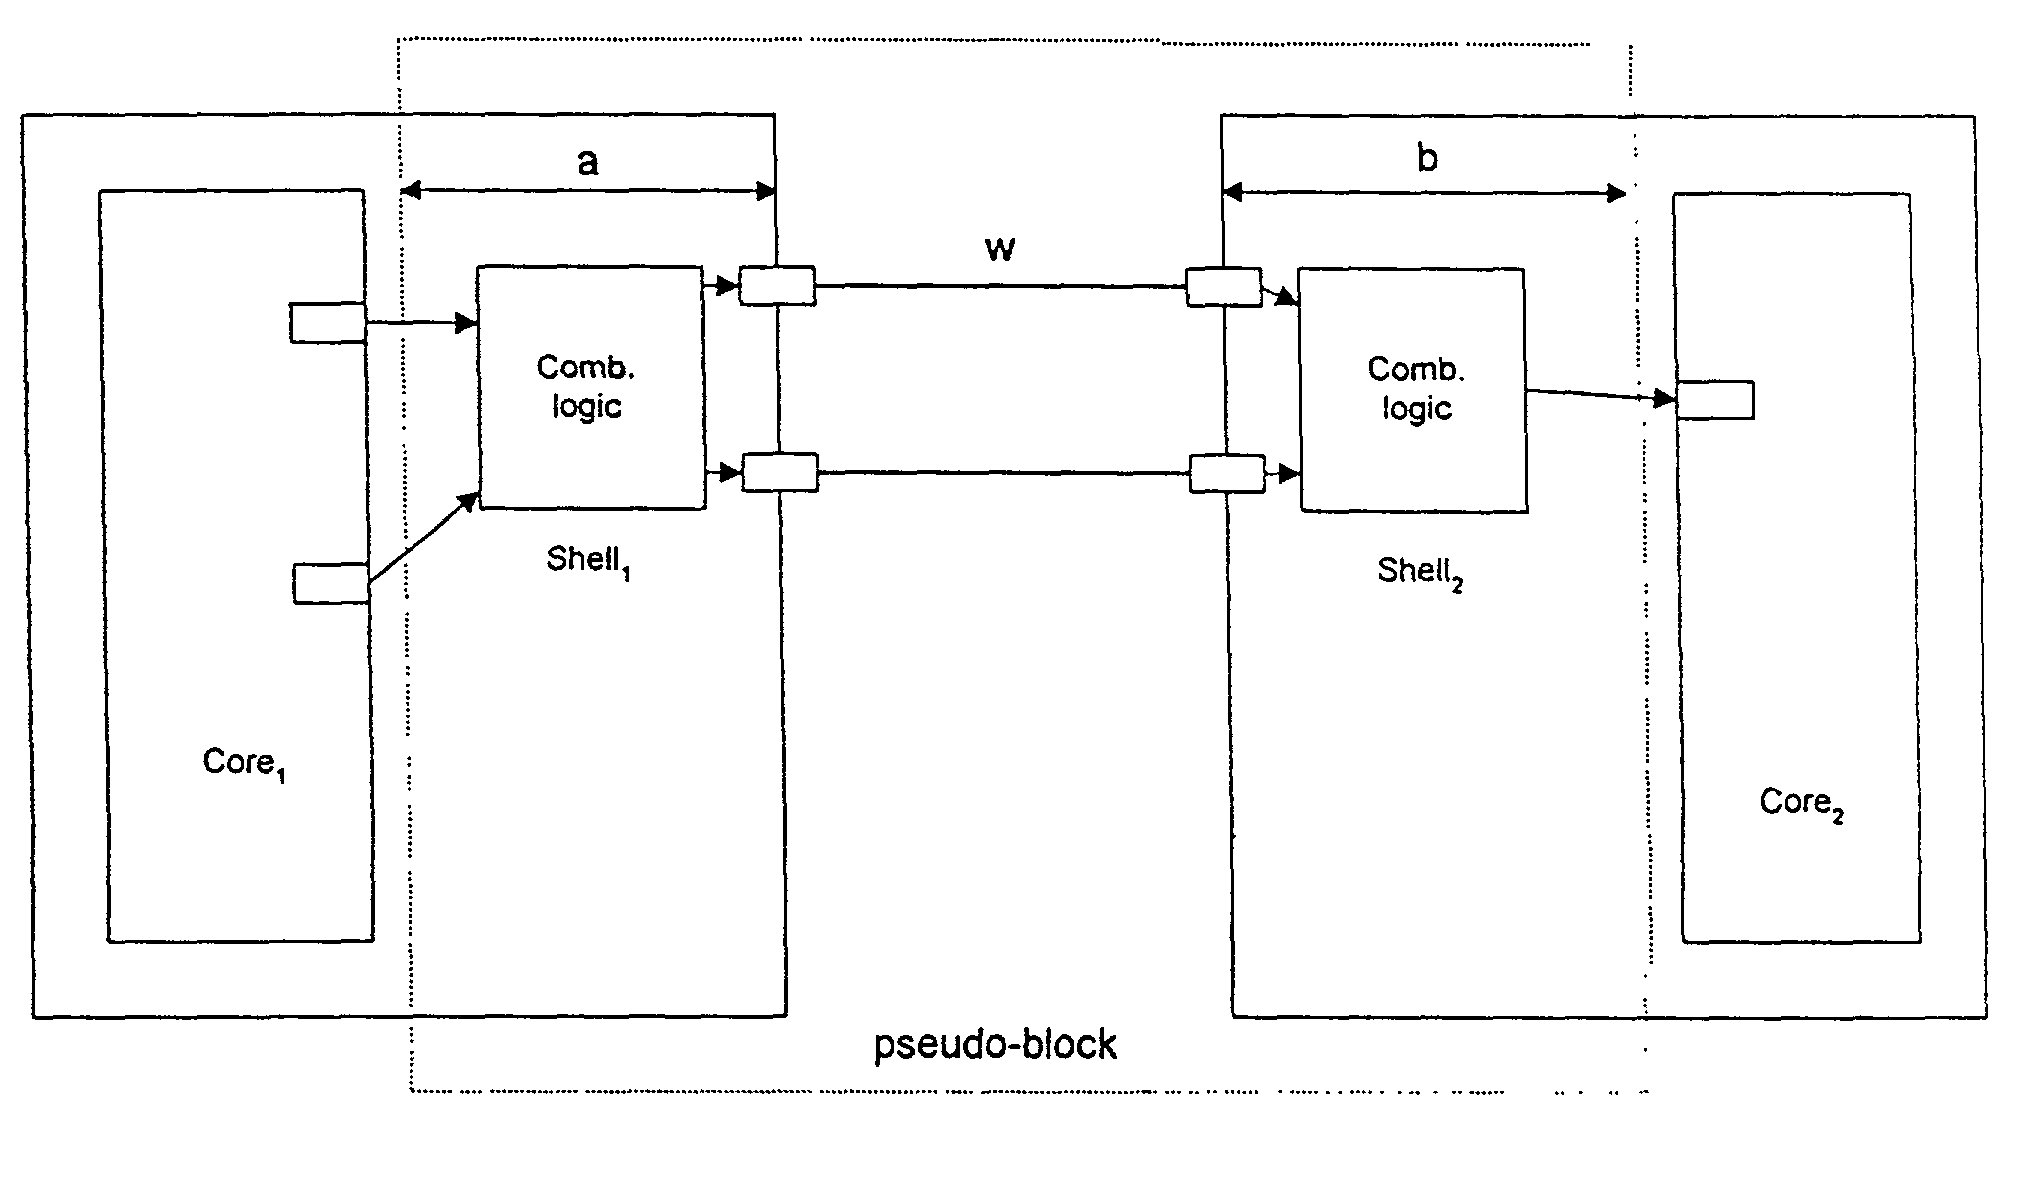 System chip synthesis